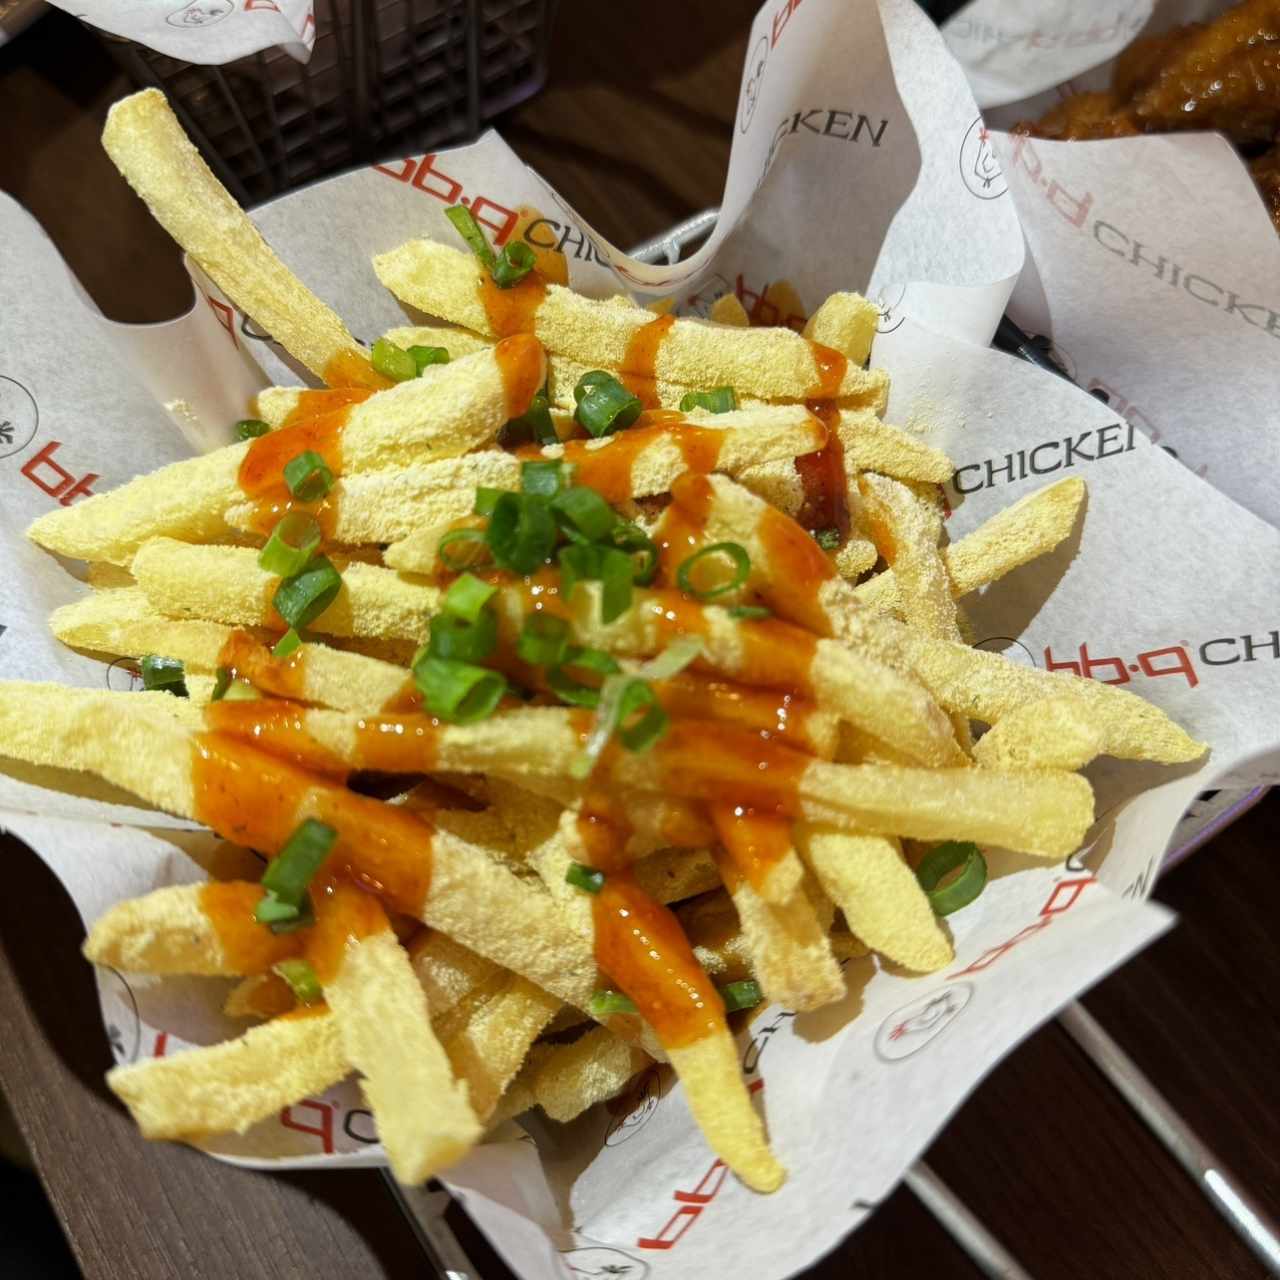 SIDES - CHEESLING FRIES